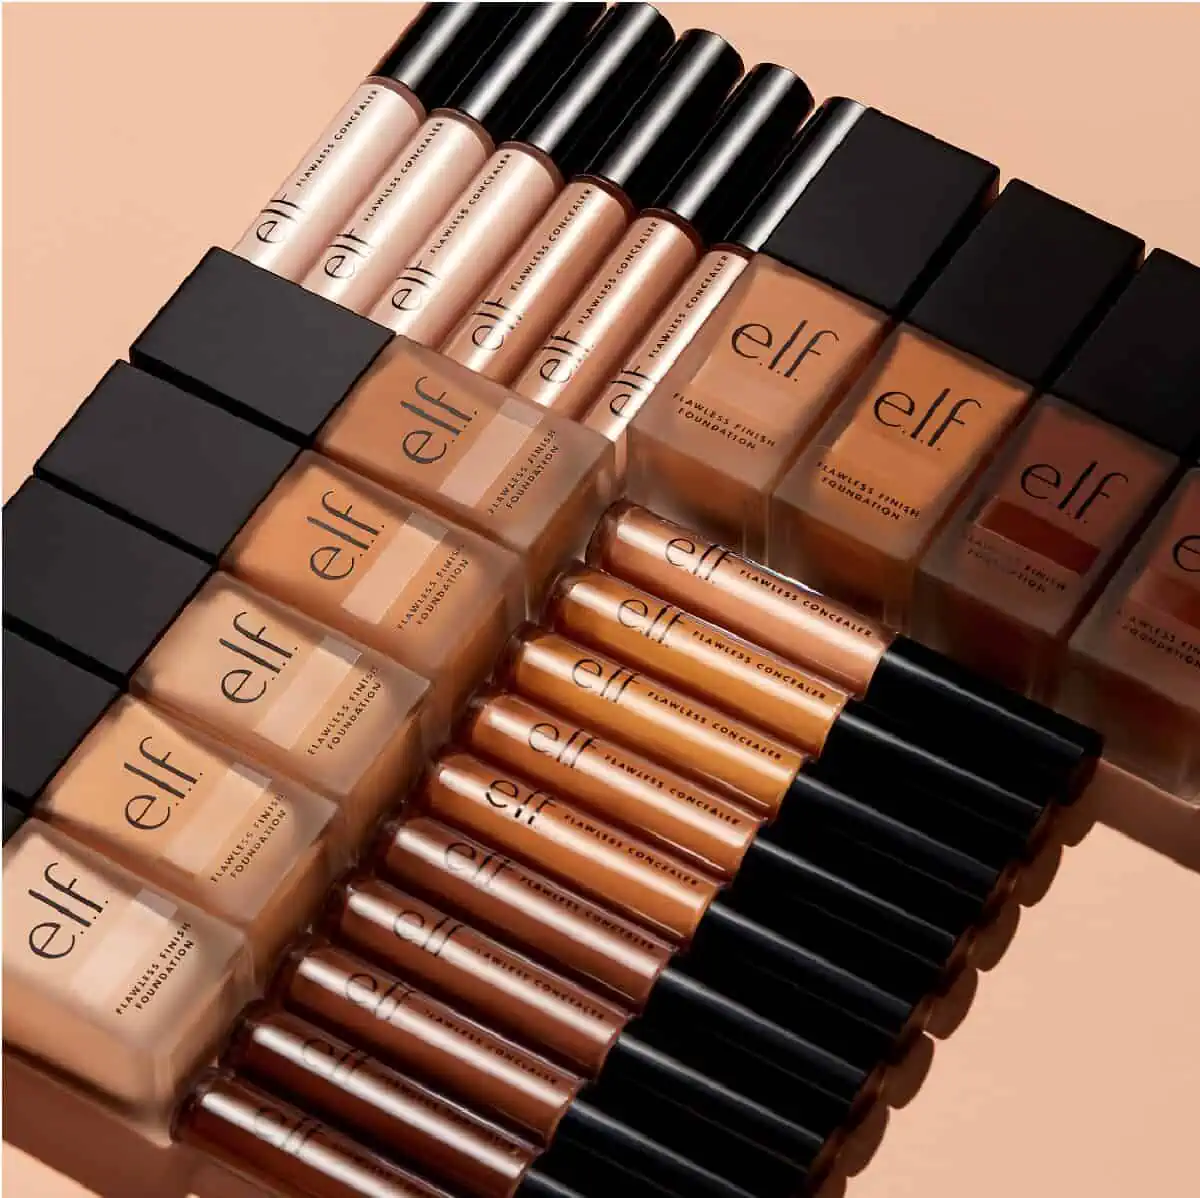 A collection of E.L.F. Cosmetics' vegan and cruelty-free Flawless Foundation and Concealer bottles laying on their sides in rows perpendicular to each other on a peach colored background.